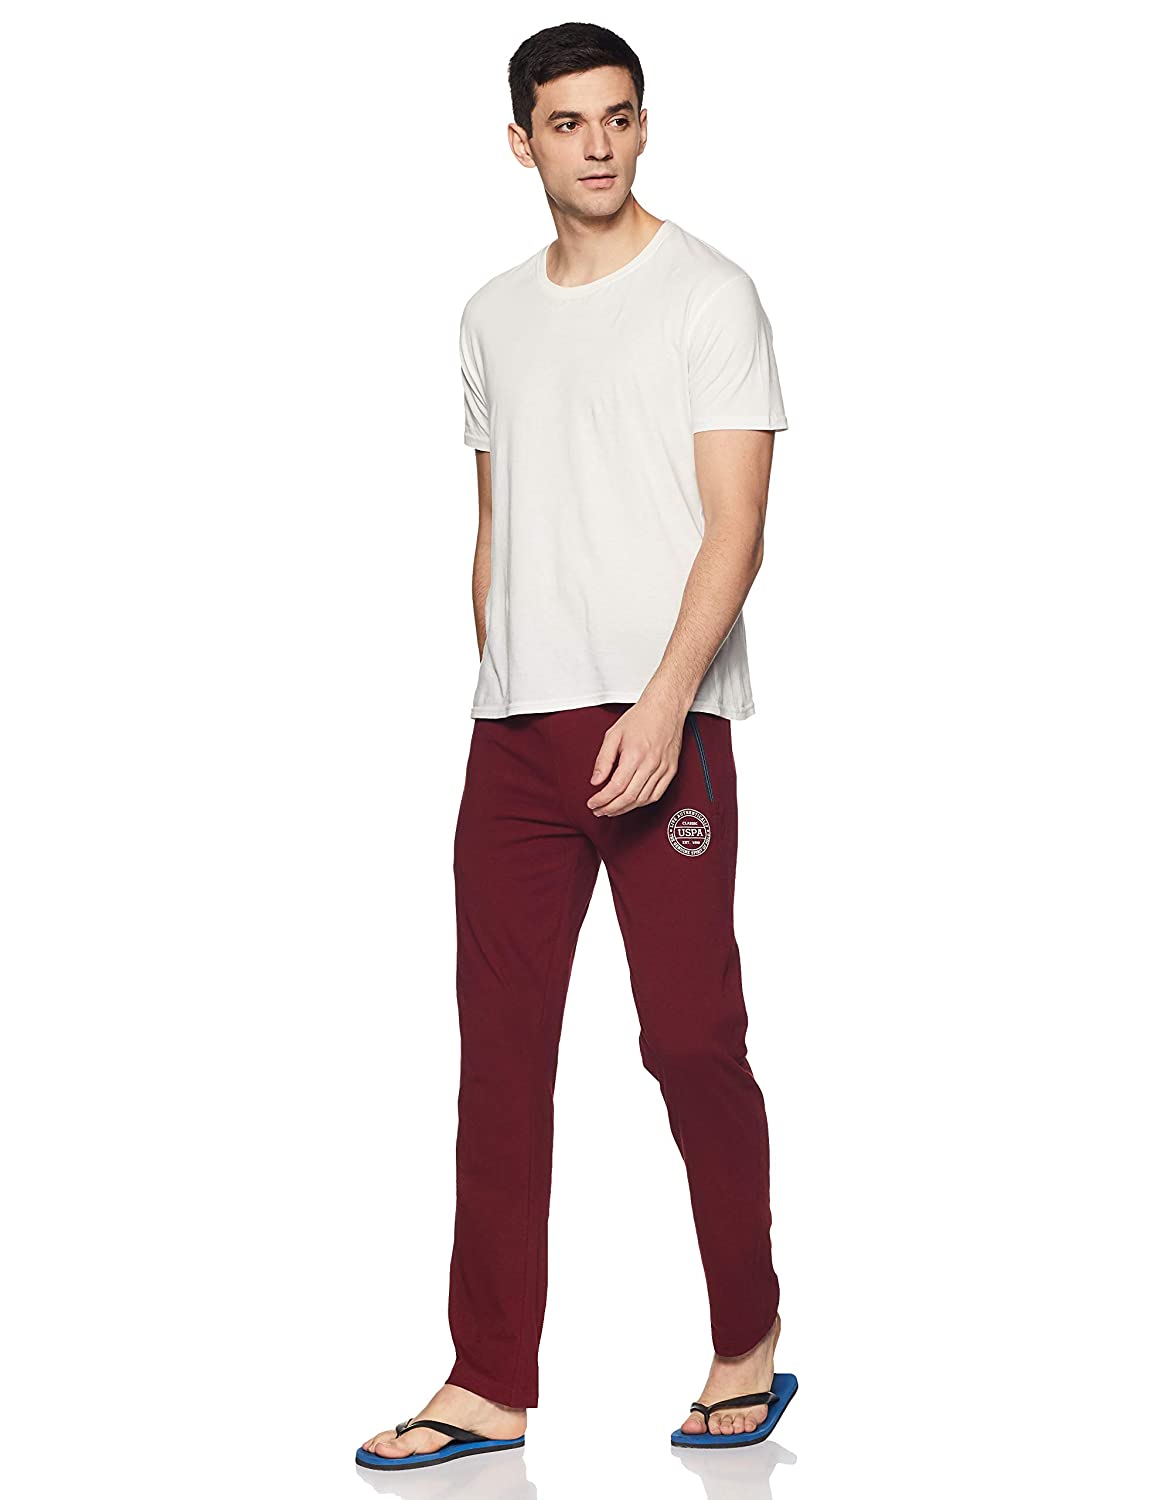 Buy Black Trousers  Pants for Boys by US Polo Assn Online  Ajiocom